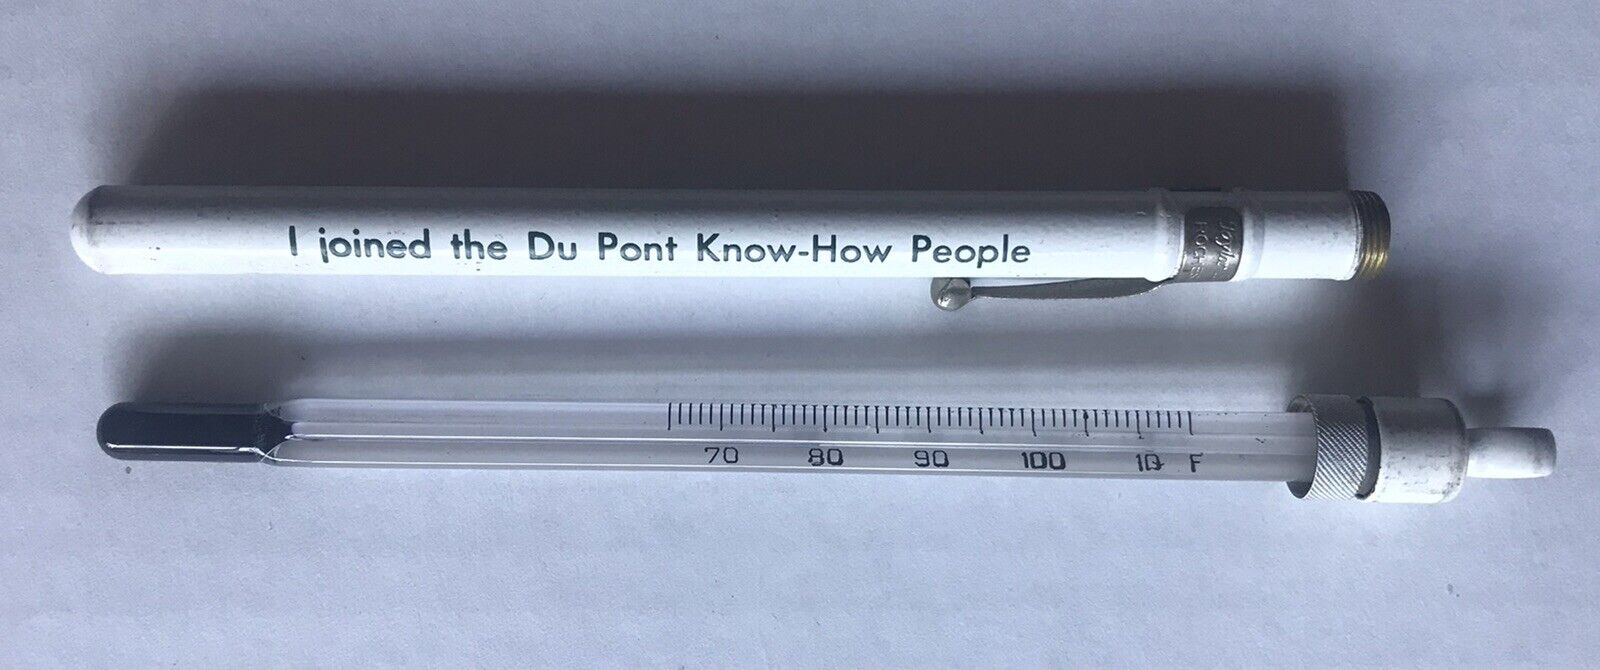 Vintage Du Pont Travel Pen Thermometer Know How People Pocket Clip Advertising